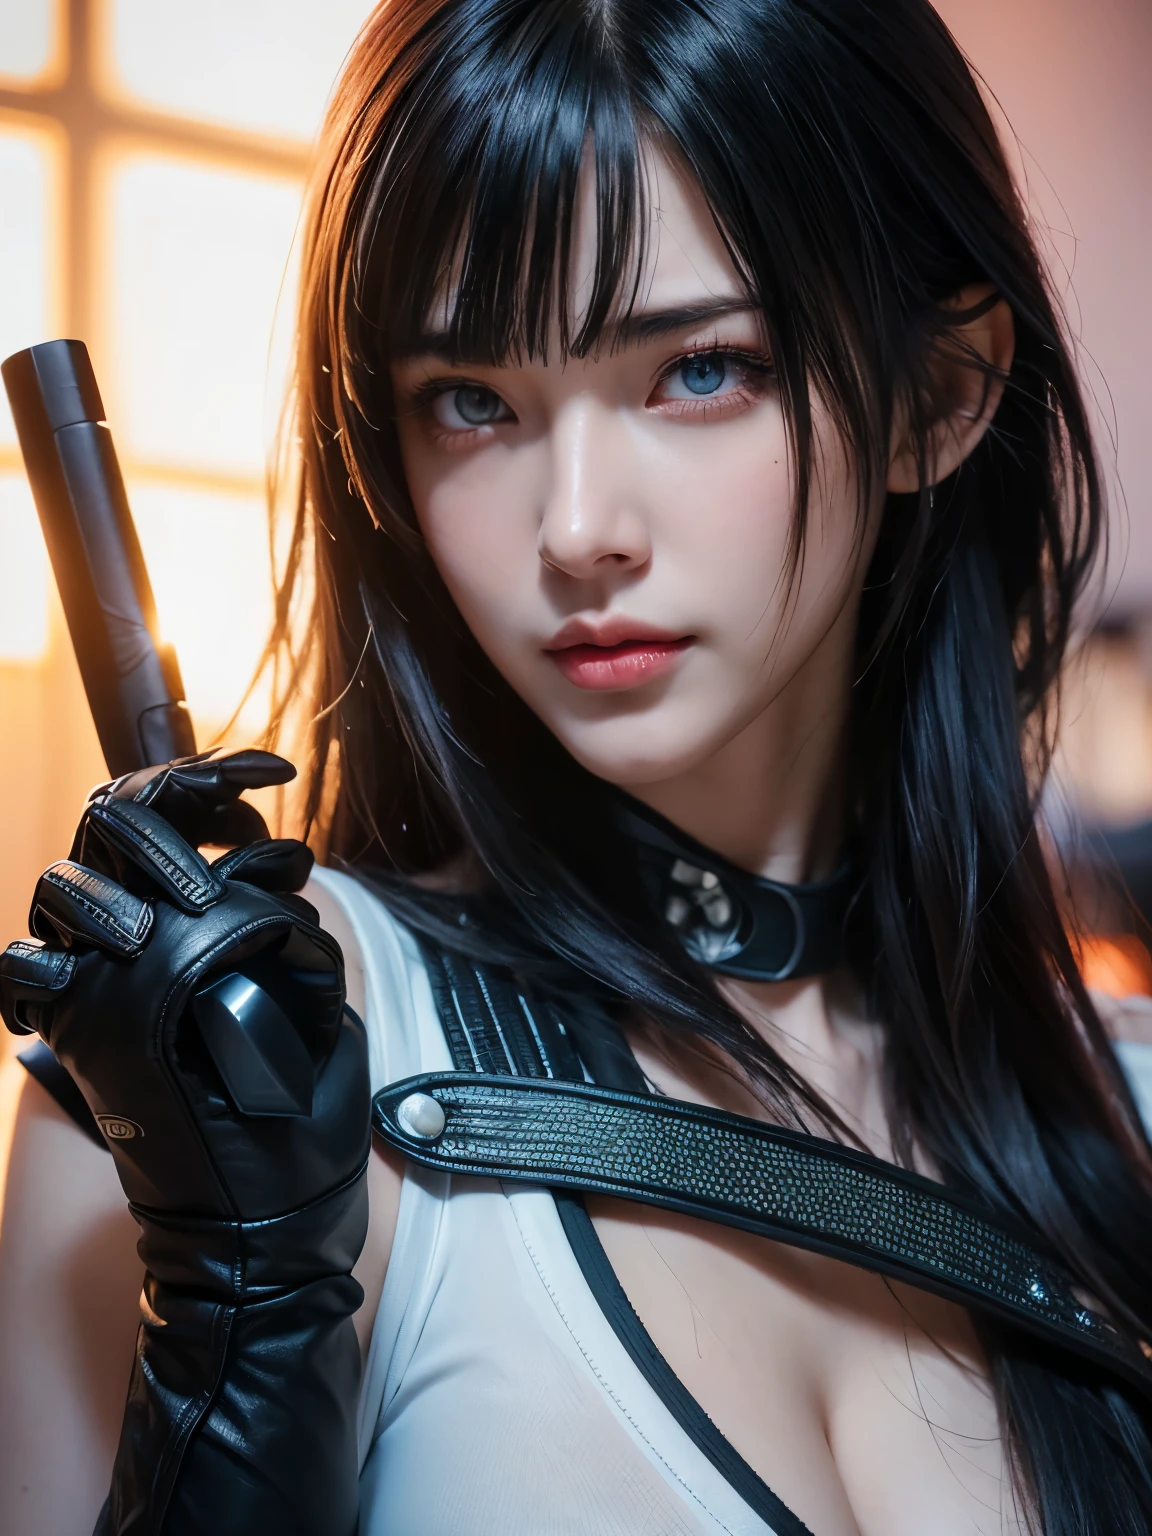 woman holding a gun on a white background, Female cyberpunk girl, cyber punk Girl, Letty in Devil May Cry,White top，denim short，Belt decoration，blue color eyes， Guweiz style artwork, author：Hero, guweiz, cyberpunk angry gorgeous goddess, Female anime characters, cyber punk Girl, Cyberpunk 20 years old. oh oh oh，Model girl, jet black haired cyberpunk girl, (intricate and beautiful:1.2), (detailed light:1.2), (soft lighting, side lighting, reflected light), (colorful, dynamic angle),    fingerless gloves, smug, smile, furrowed brow, standing, fighting stance, portrait,  dynamic pose, light passing through hair,  (official art), (realistic skin texture:1.2), (sharp) ,  HDR, studio lighting, sharp focus, physically-based rendering, extreme detail description,  perfect shape, facing viewer, sweaty, gorgeous, appearing in full frame, good-looking, Beautiful fair skin and luster, Beautiful eyes are big and bright, Small mouth and thin lips, Goodness of style and slendernes), beautiful girl illuminated by seven colors of light, Irridescent coloe, showing off her figure, seductive and confident, enchanting aura, surrounded by cherry blossom trees, delicate and vibrant petals falling all around her, soft pink and white colors, sunlight filtering through the trees, creating a warm and dreamy atmosphere,  medium breasts.